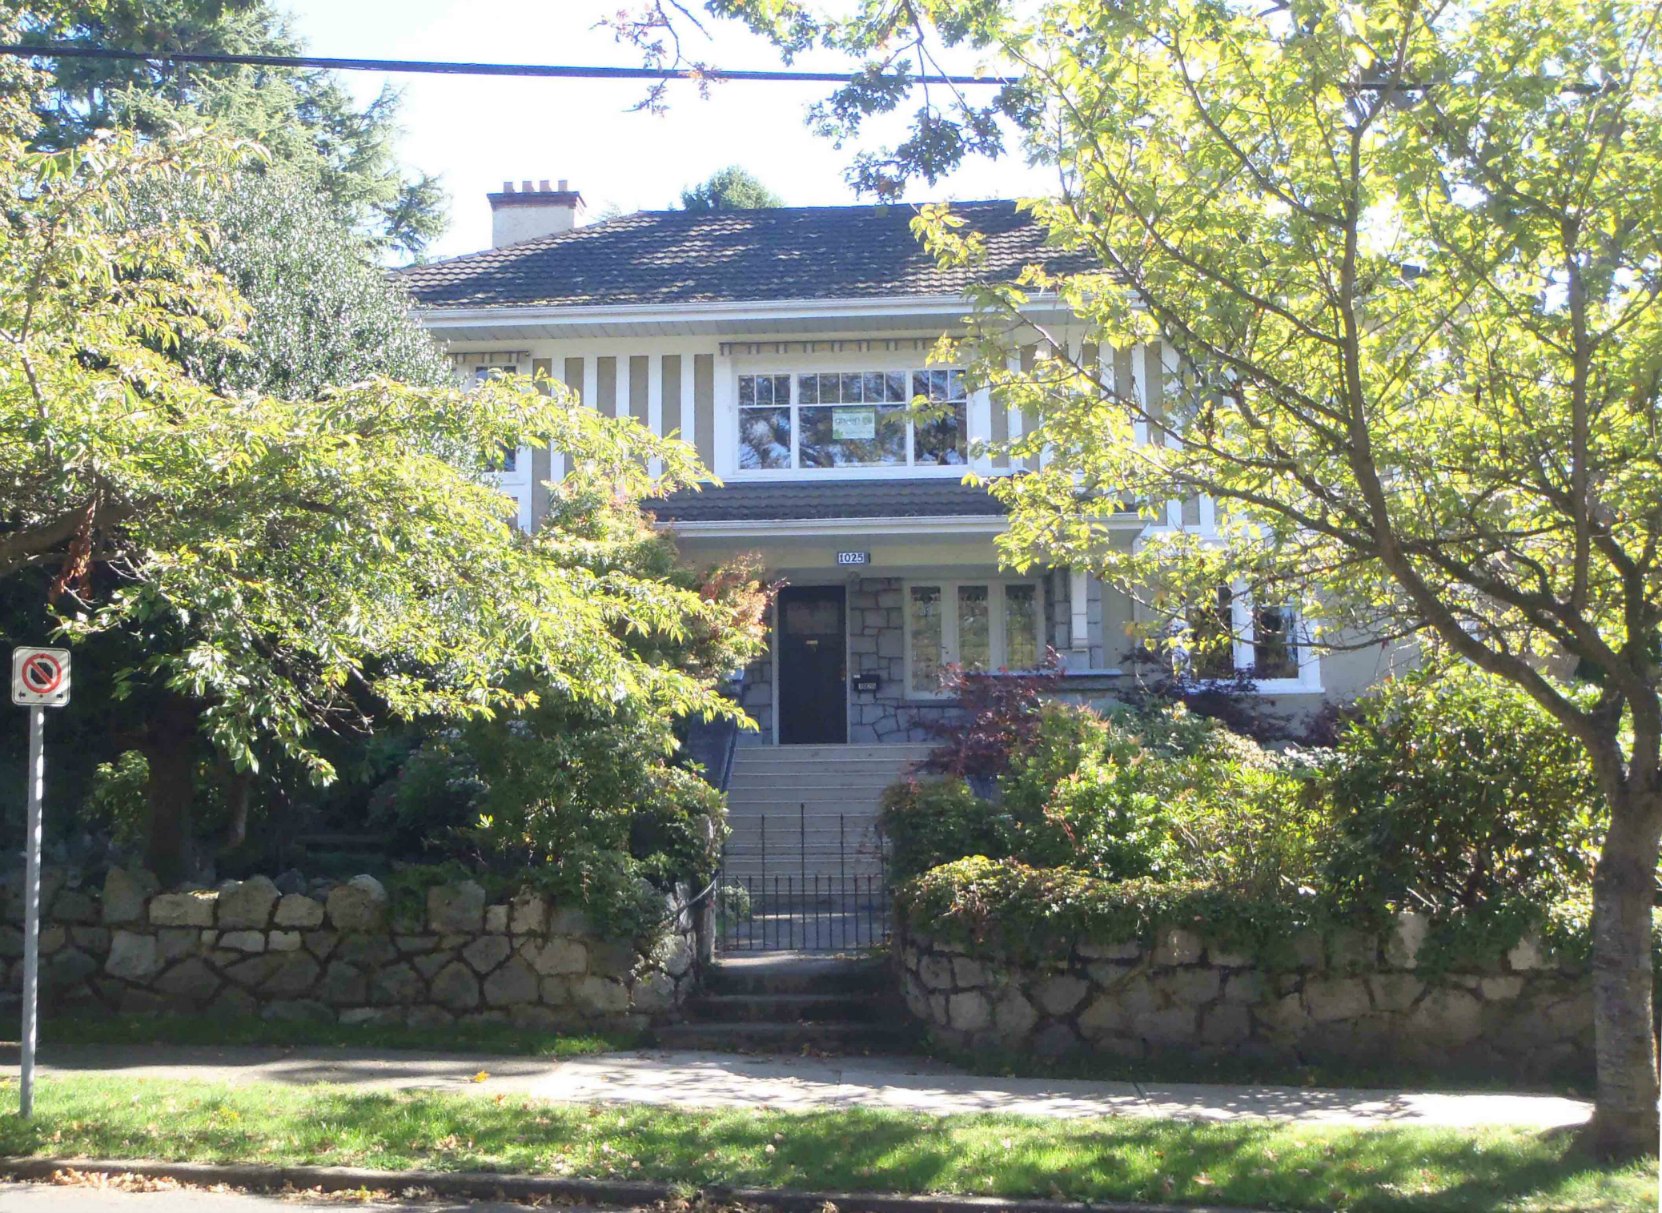 1025 Moss Street, designed by architect Samuel Maclure in 1912-13 for George and Josephine Rishardson